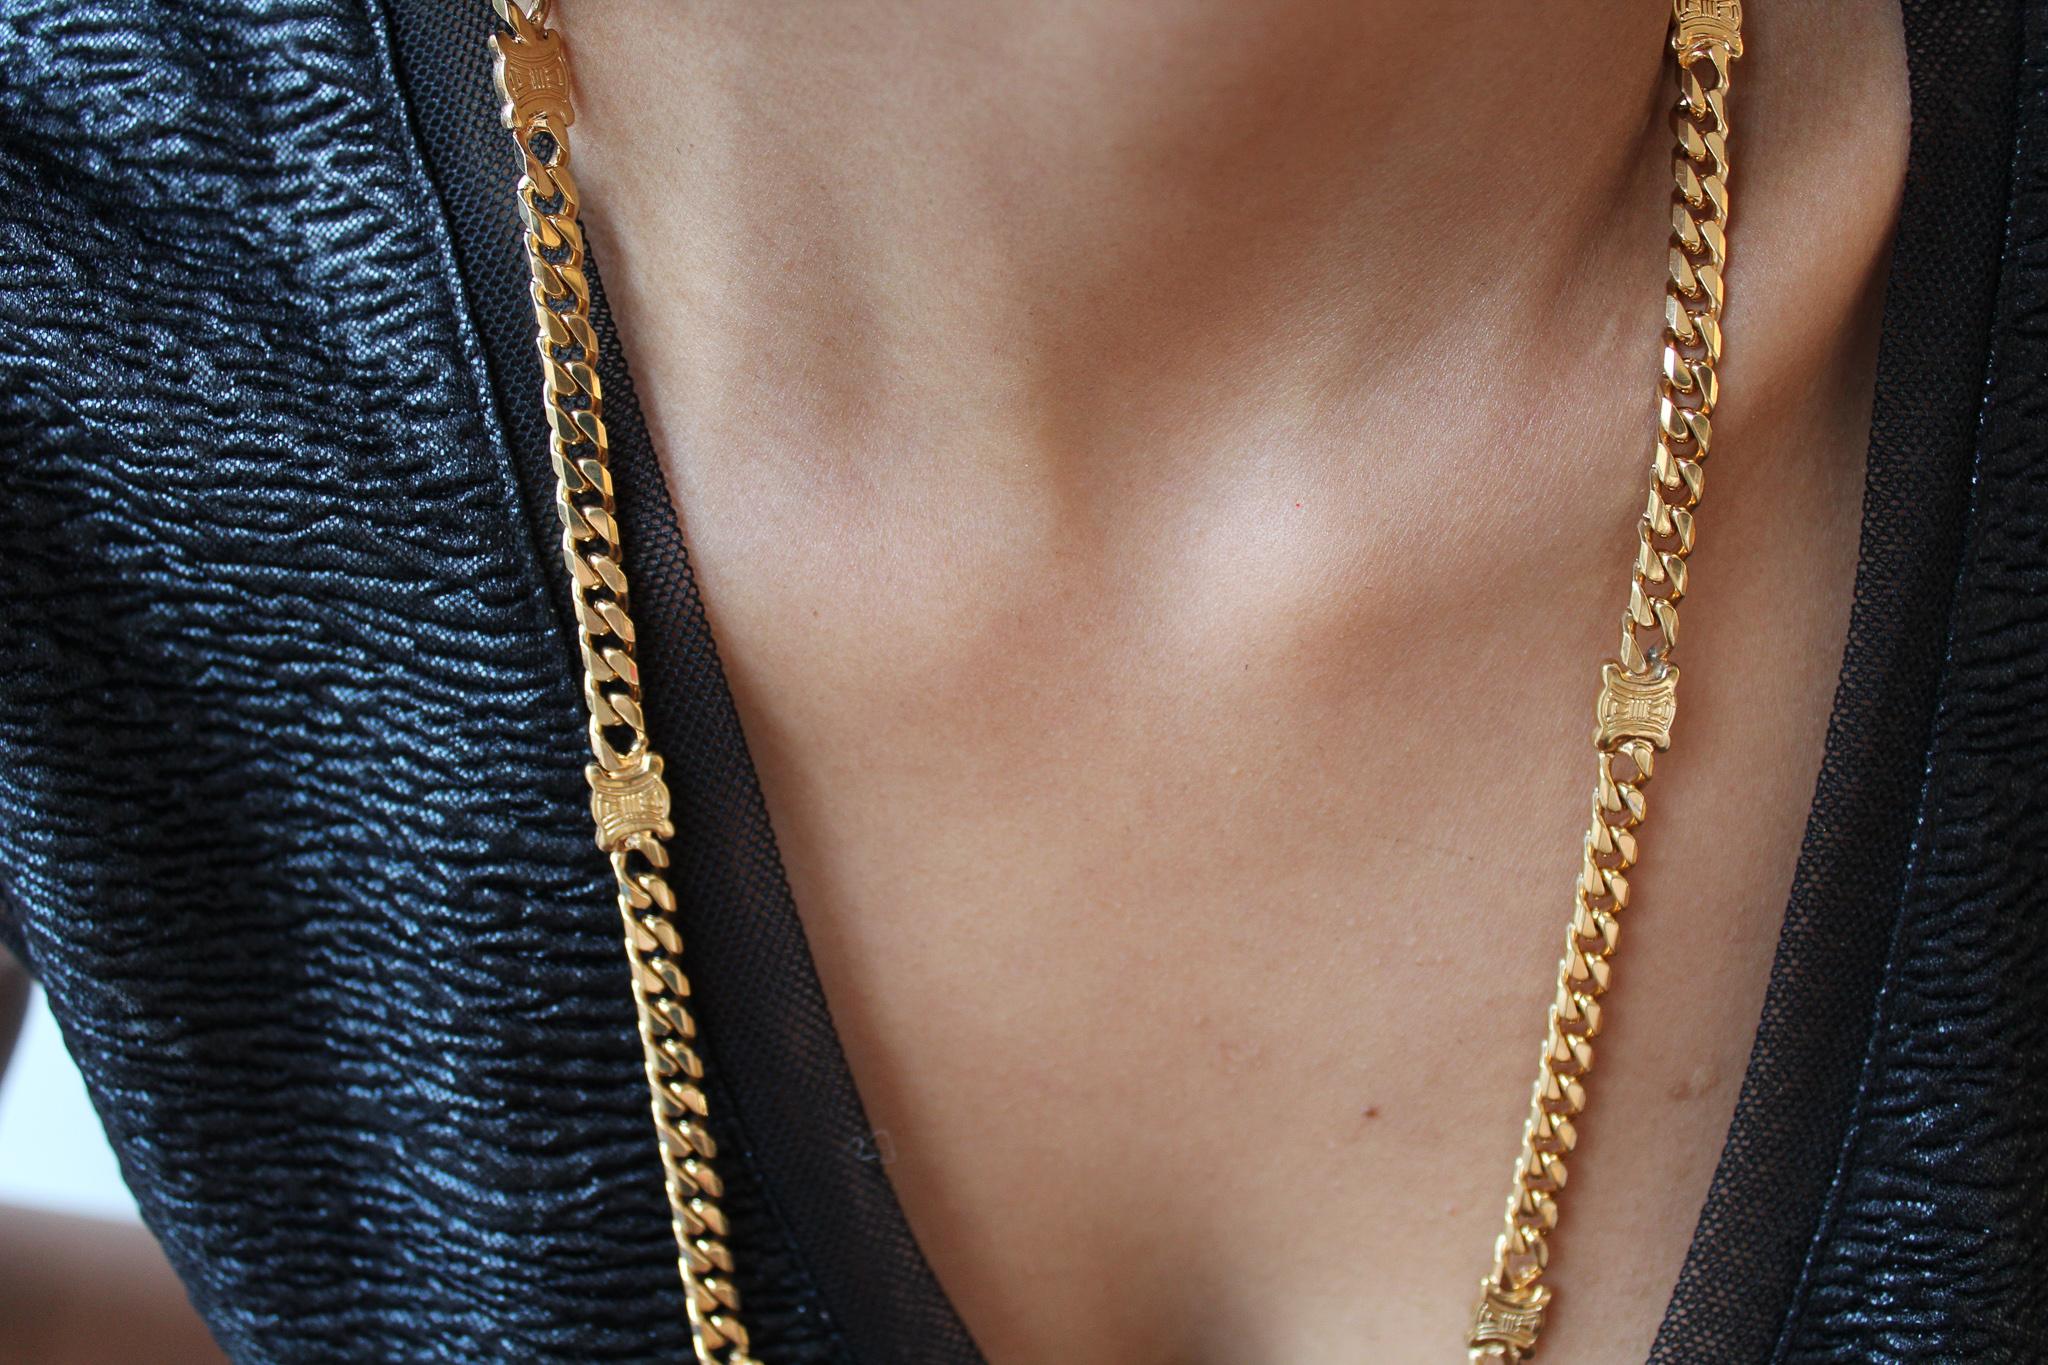 Celine Vintage 1980s Necklace

A super cool long chunky chain from the Celine 80s archive.  Made in Italy in the 1980s, this chunky curb chain is crafted from high quality gold plated metal and features the iconic 